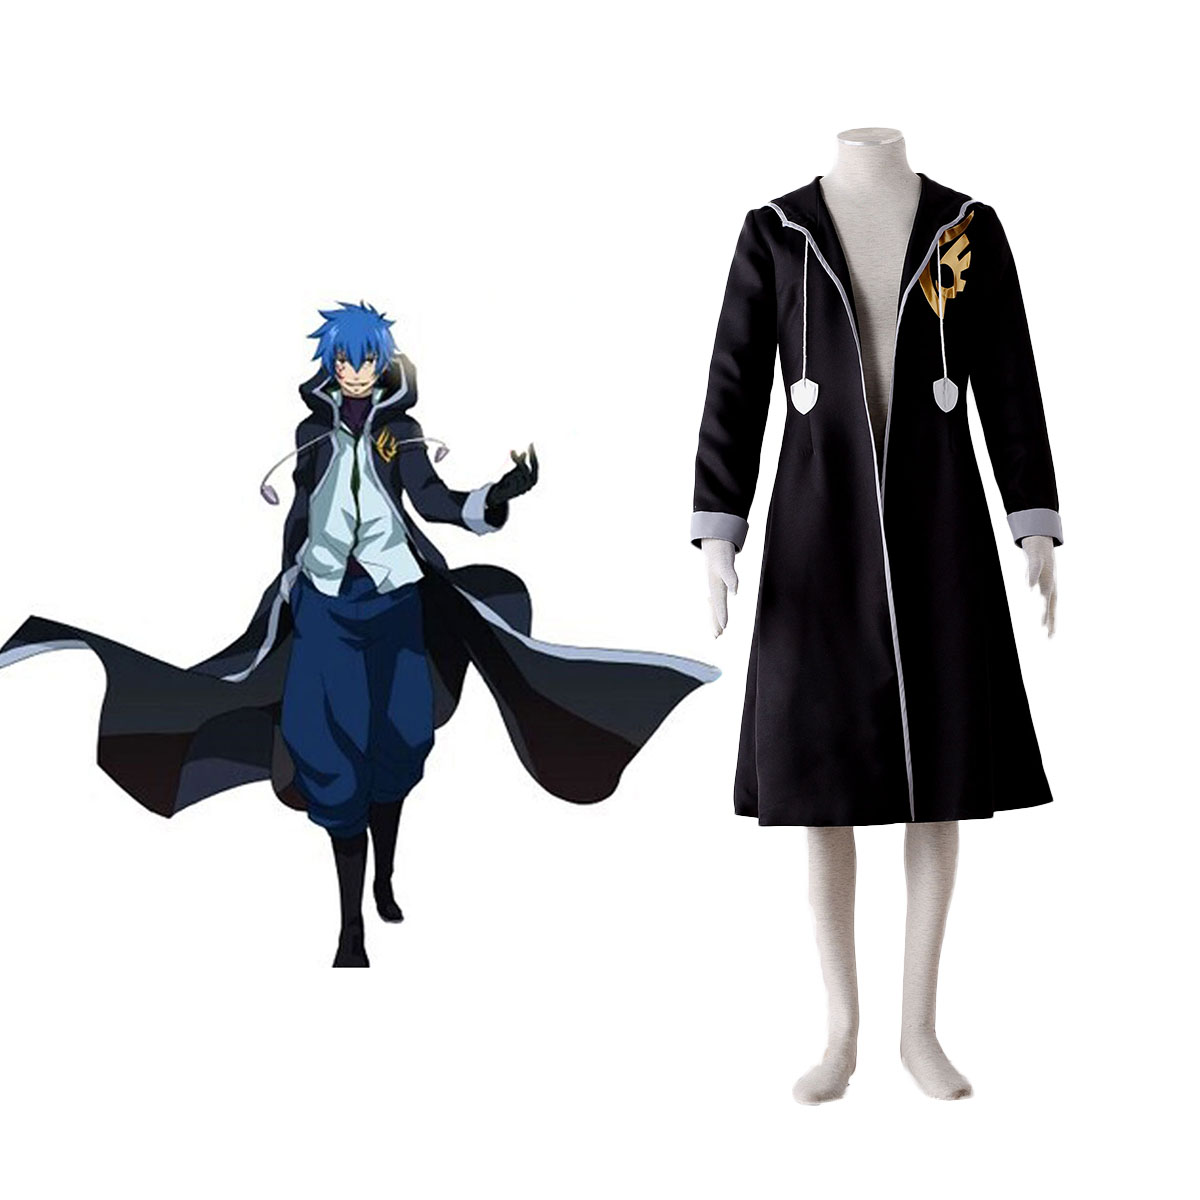 Fairy Tail Jellal Fernandes 1ST Cosplay Costumes Deluxe Edition [E198]